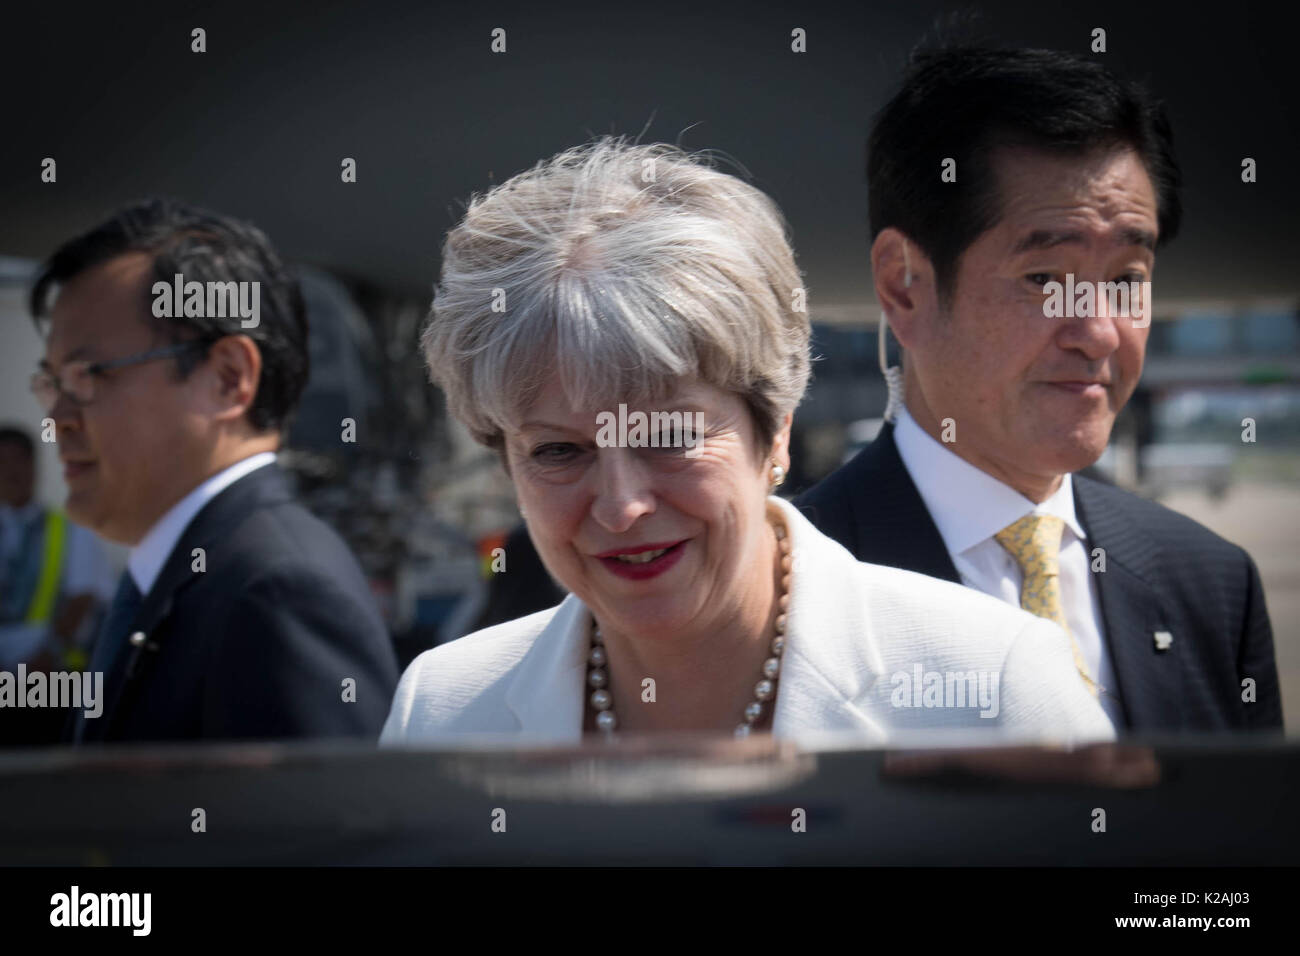 Prime Minister Theresa May arrives in Kyoto for a three day visit to Japan where she will later travel to Tokyo to discuss trade and security. Stock Photo